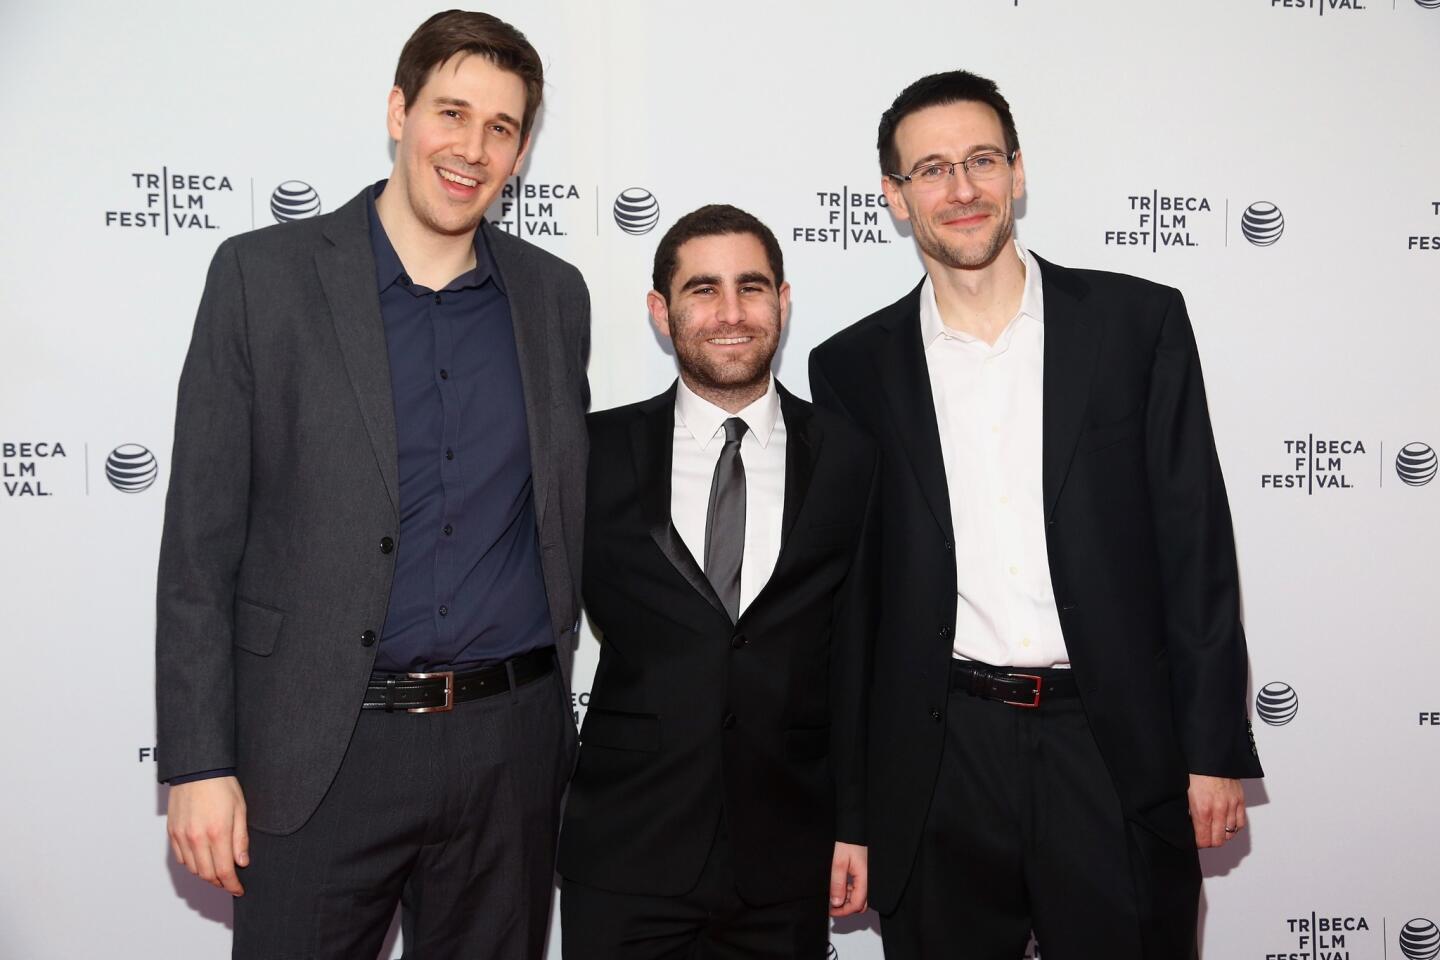 Charlie Shrem (center), former Bitcoin Foundation board member charged with money laundering in connection with the Silk Road drug market, at the 2014 premiere of a Bitcoin documentary he co-produced. .